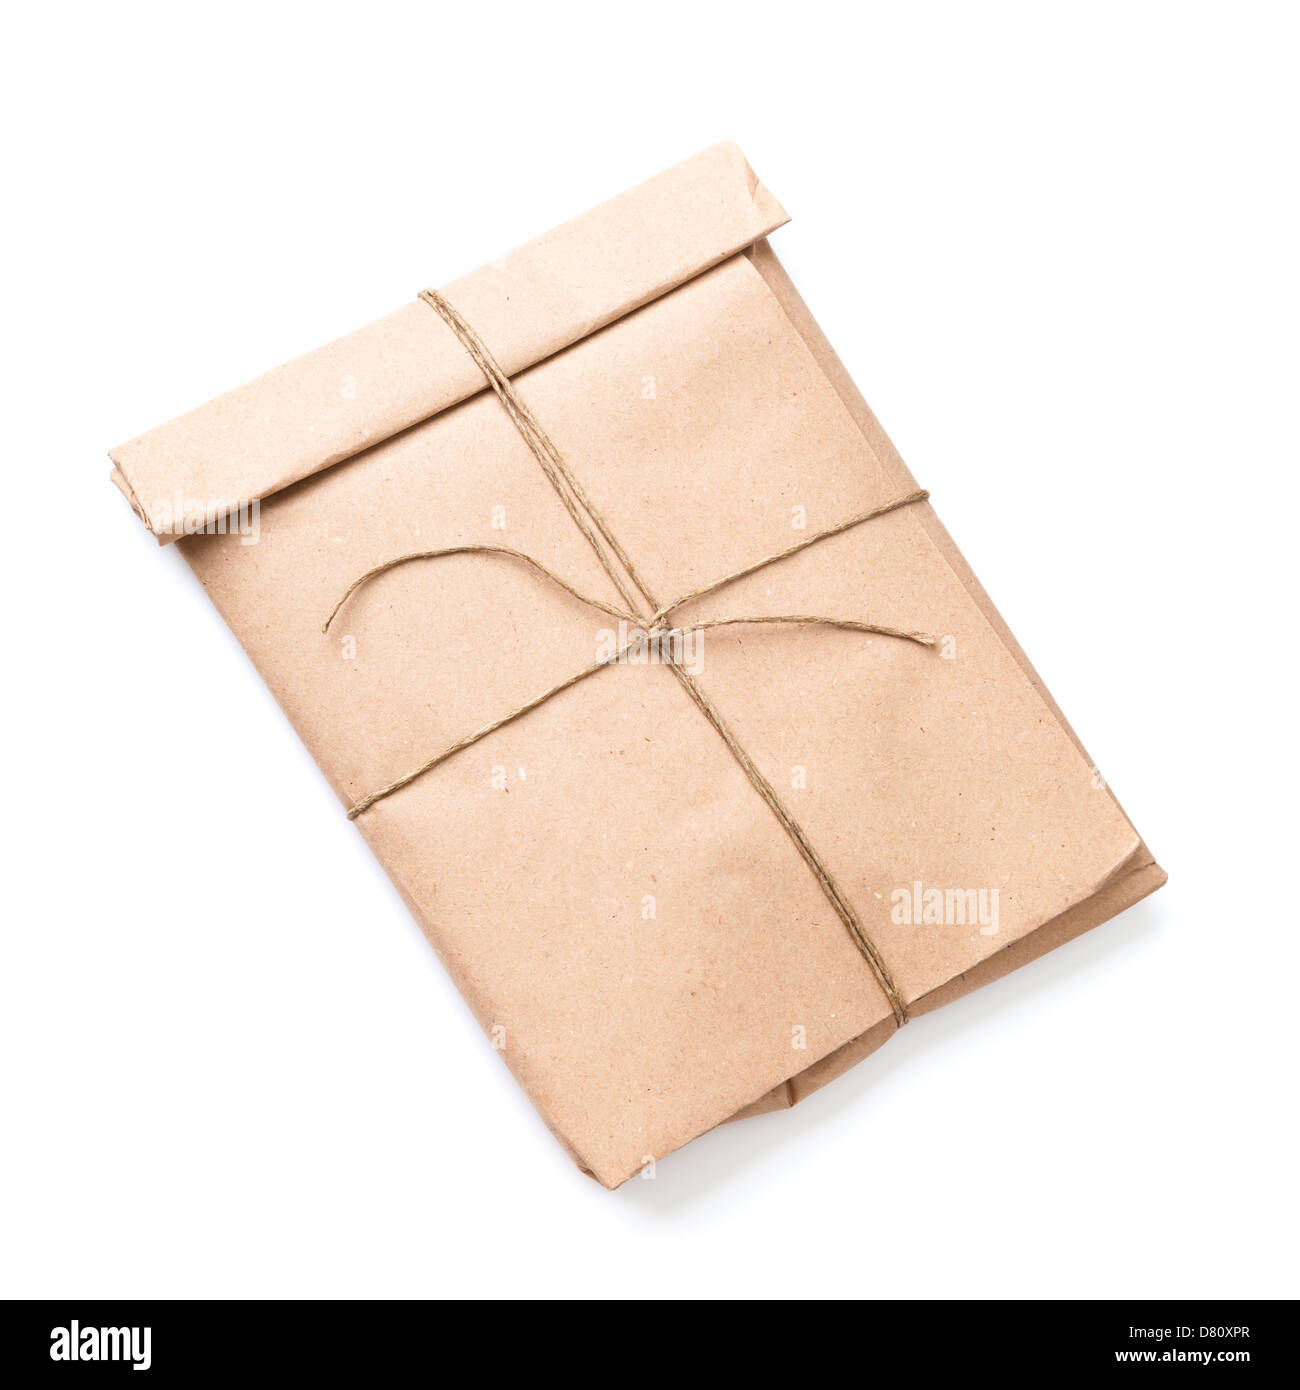 Envelope tied with a rope isolated on white background with soft shadow Stock Photo